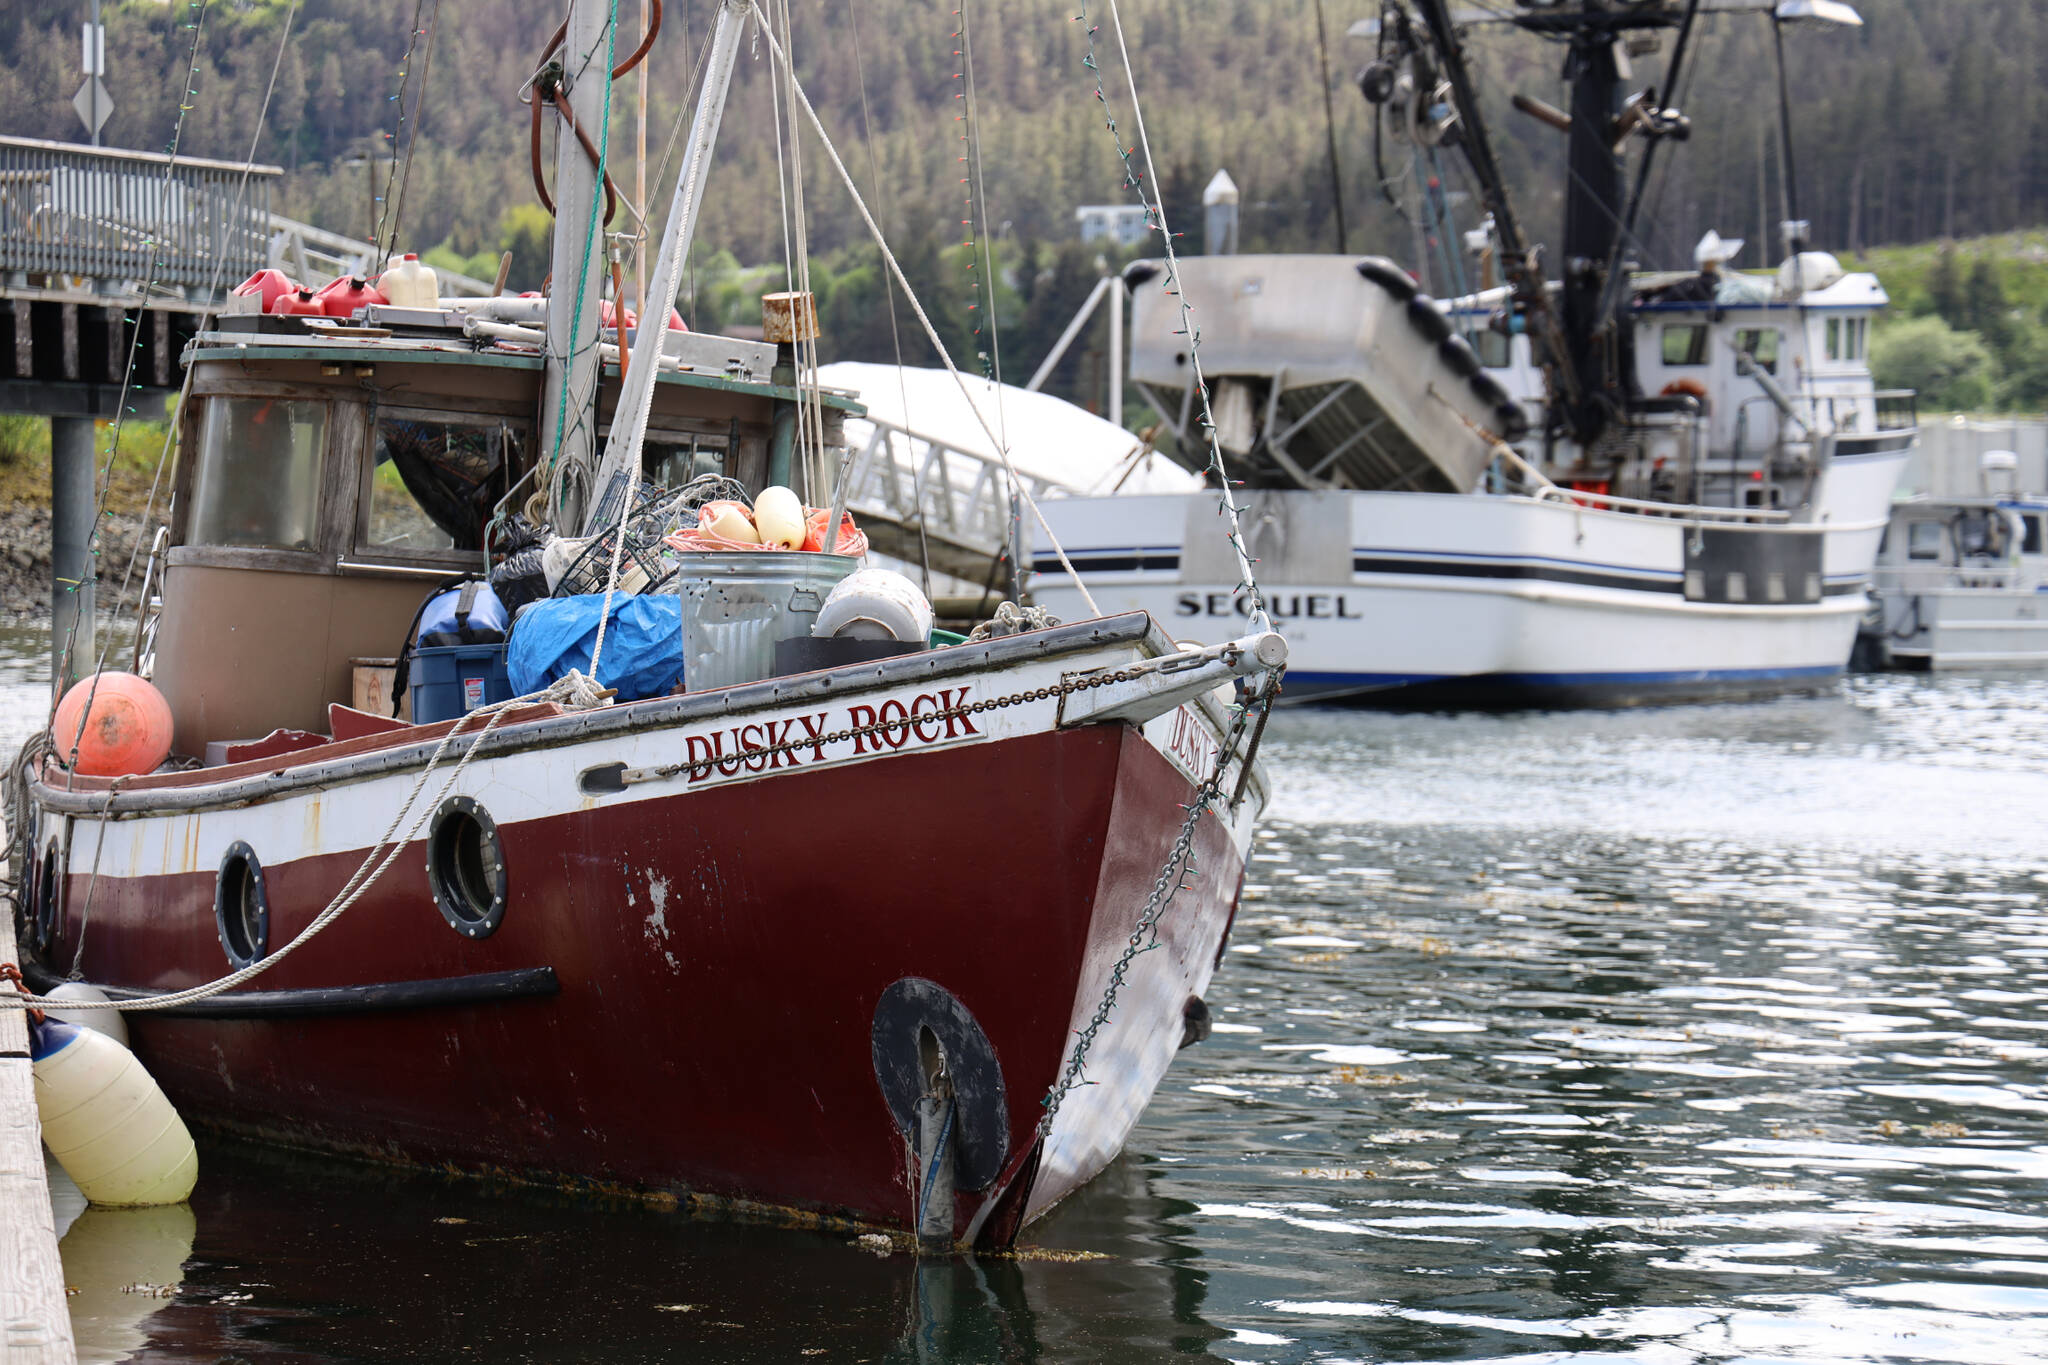 The Dusky Rock sits at Aurora Harbor Saturday morning. The vessel was towed there from Sandy beach Friday evening after three people died within a three-day period aboard the vessel while anchored offshore. (Clarise Larson / Juneau Empire)